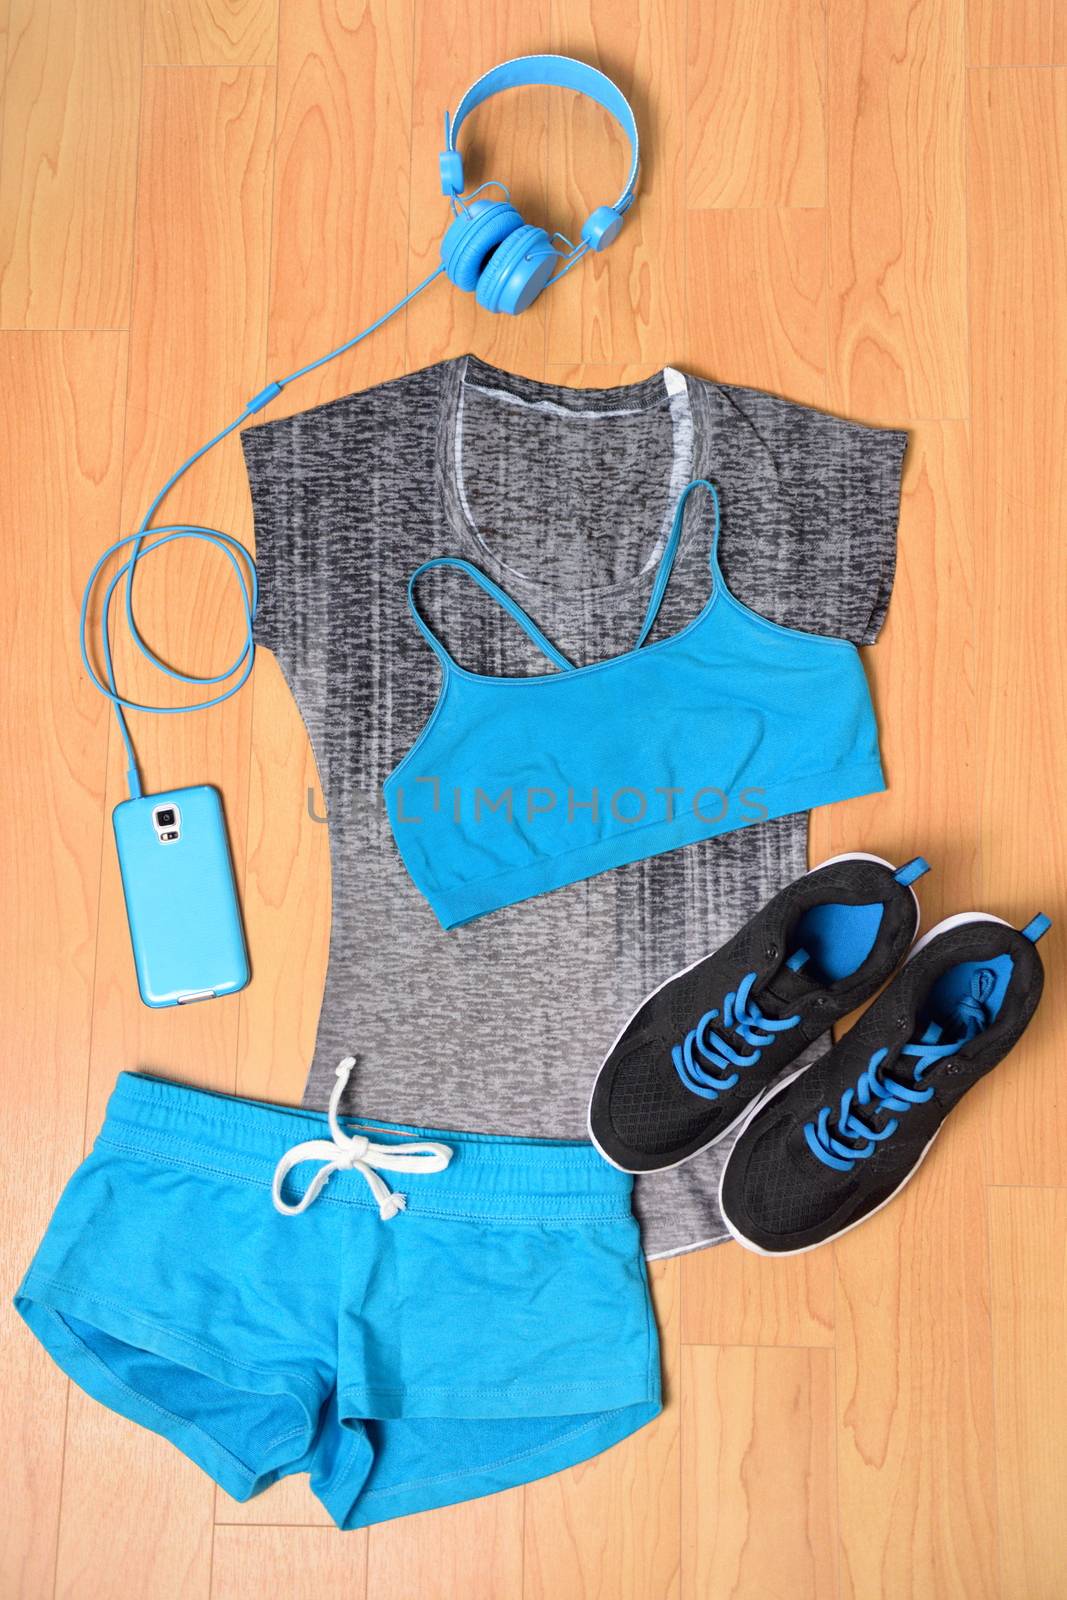 Gym outfit - workout clothing and smartphone by Maridav